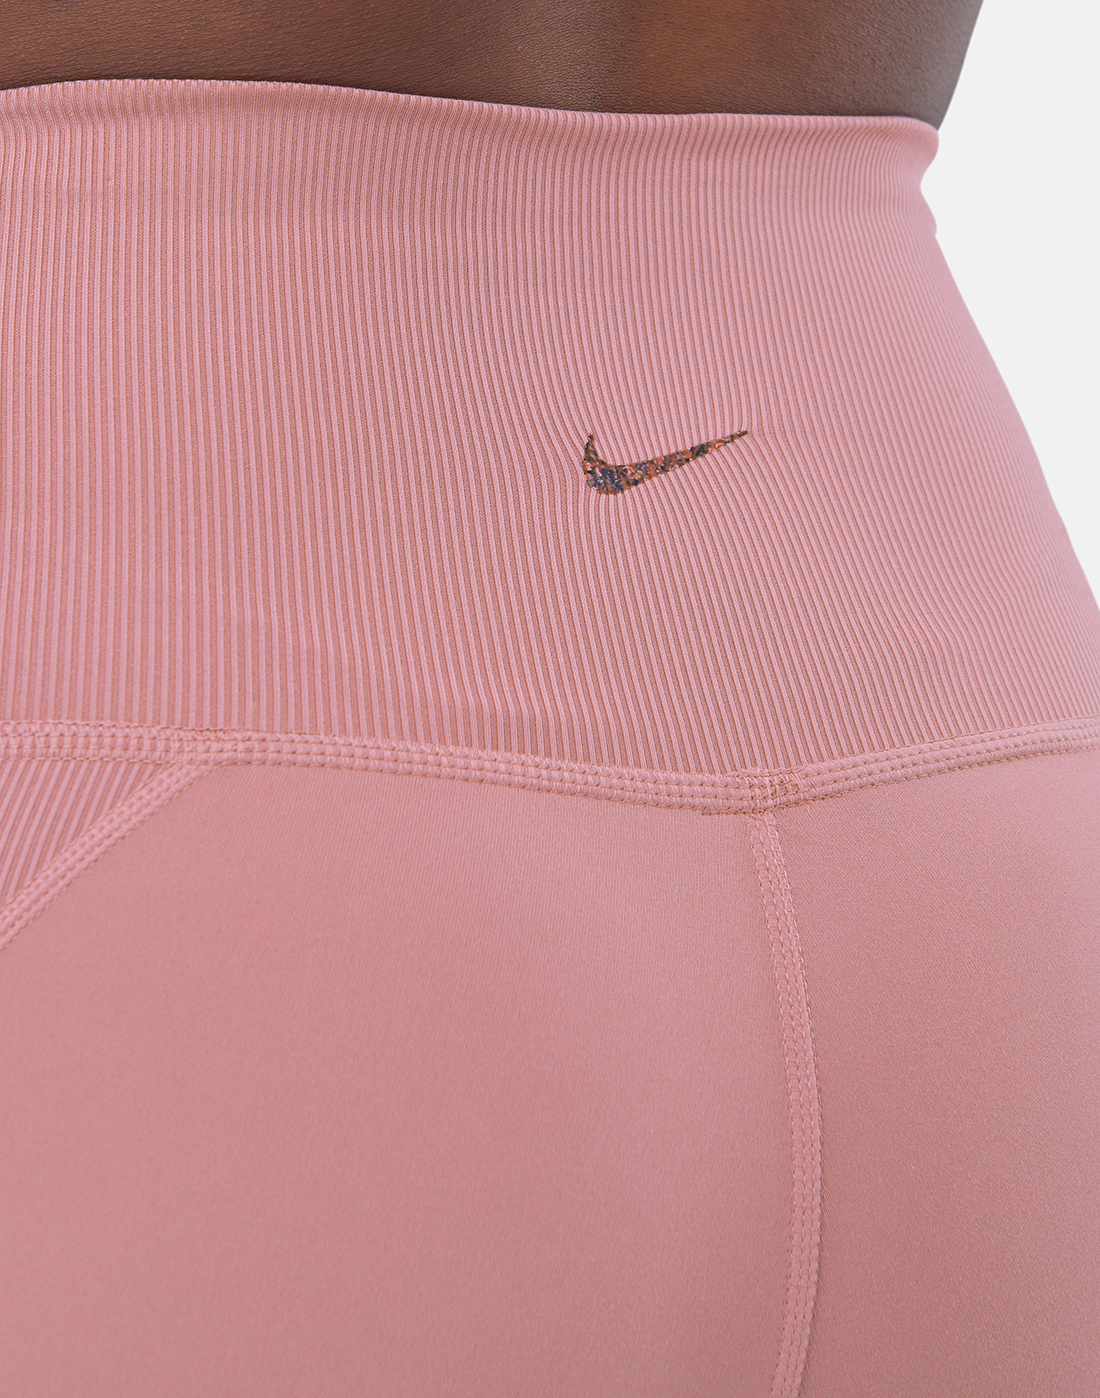 Nike Womens High Rise 7/8 Novelty Leggings - Pink | Life Style Sports IE